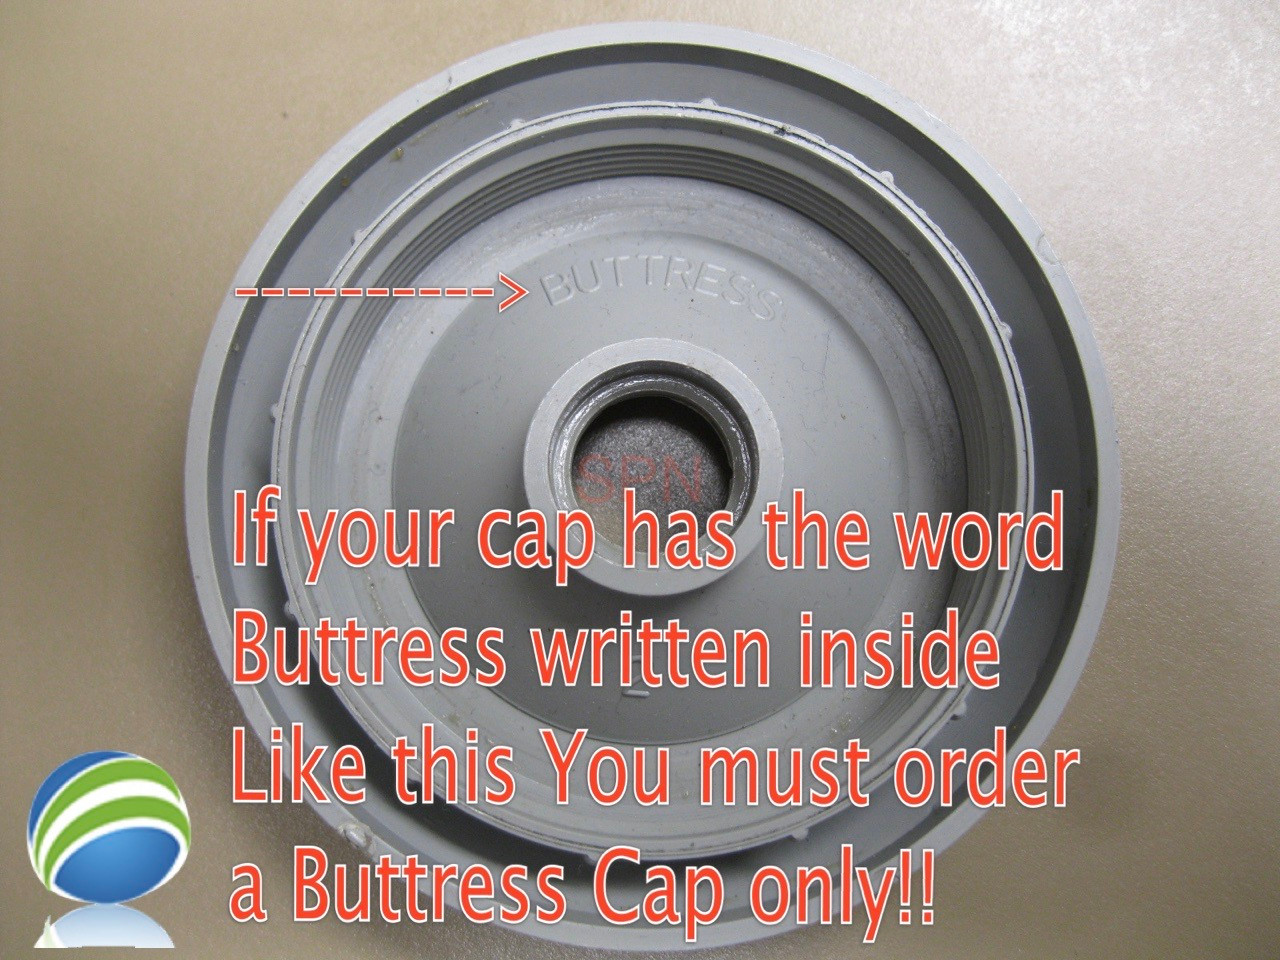 pa Hot Tub Diverter Cap 3 3/4" Wide Black Notched Buttress Style How To Video  - If your cap has the word "Buttress" written inside like this you MUST order a Buttress cap ONLY!